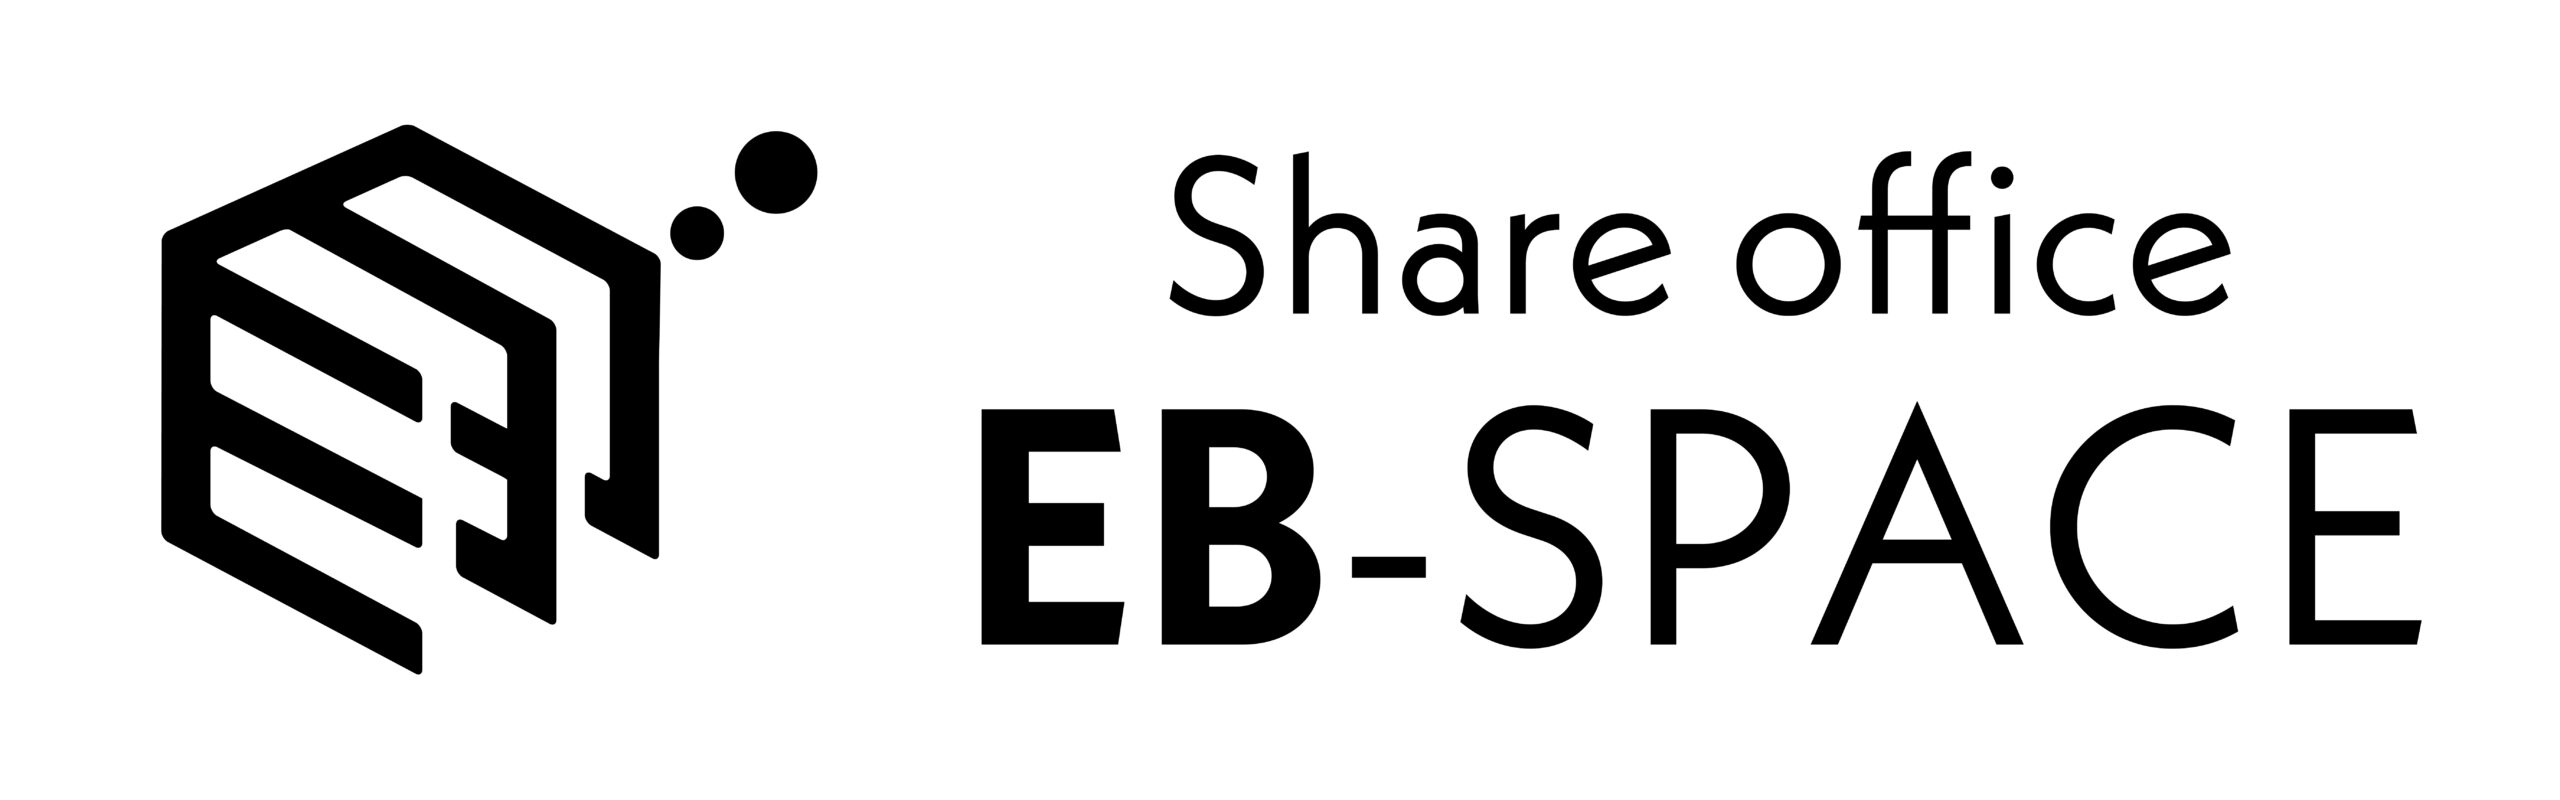 SHARE OFFICE EB-SPACE